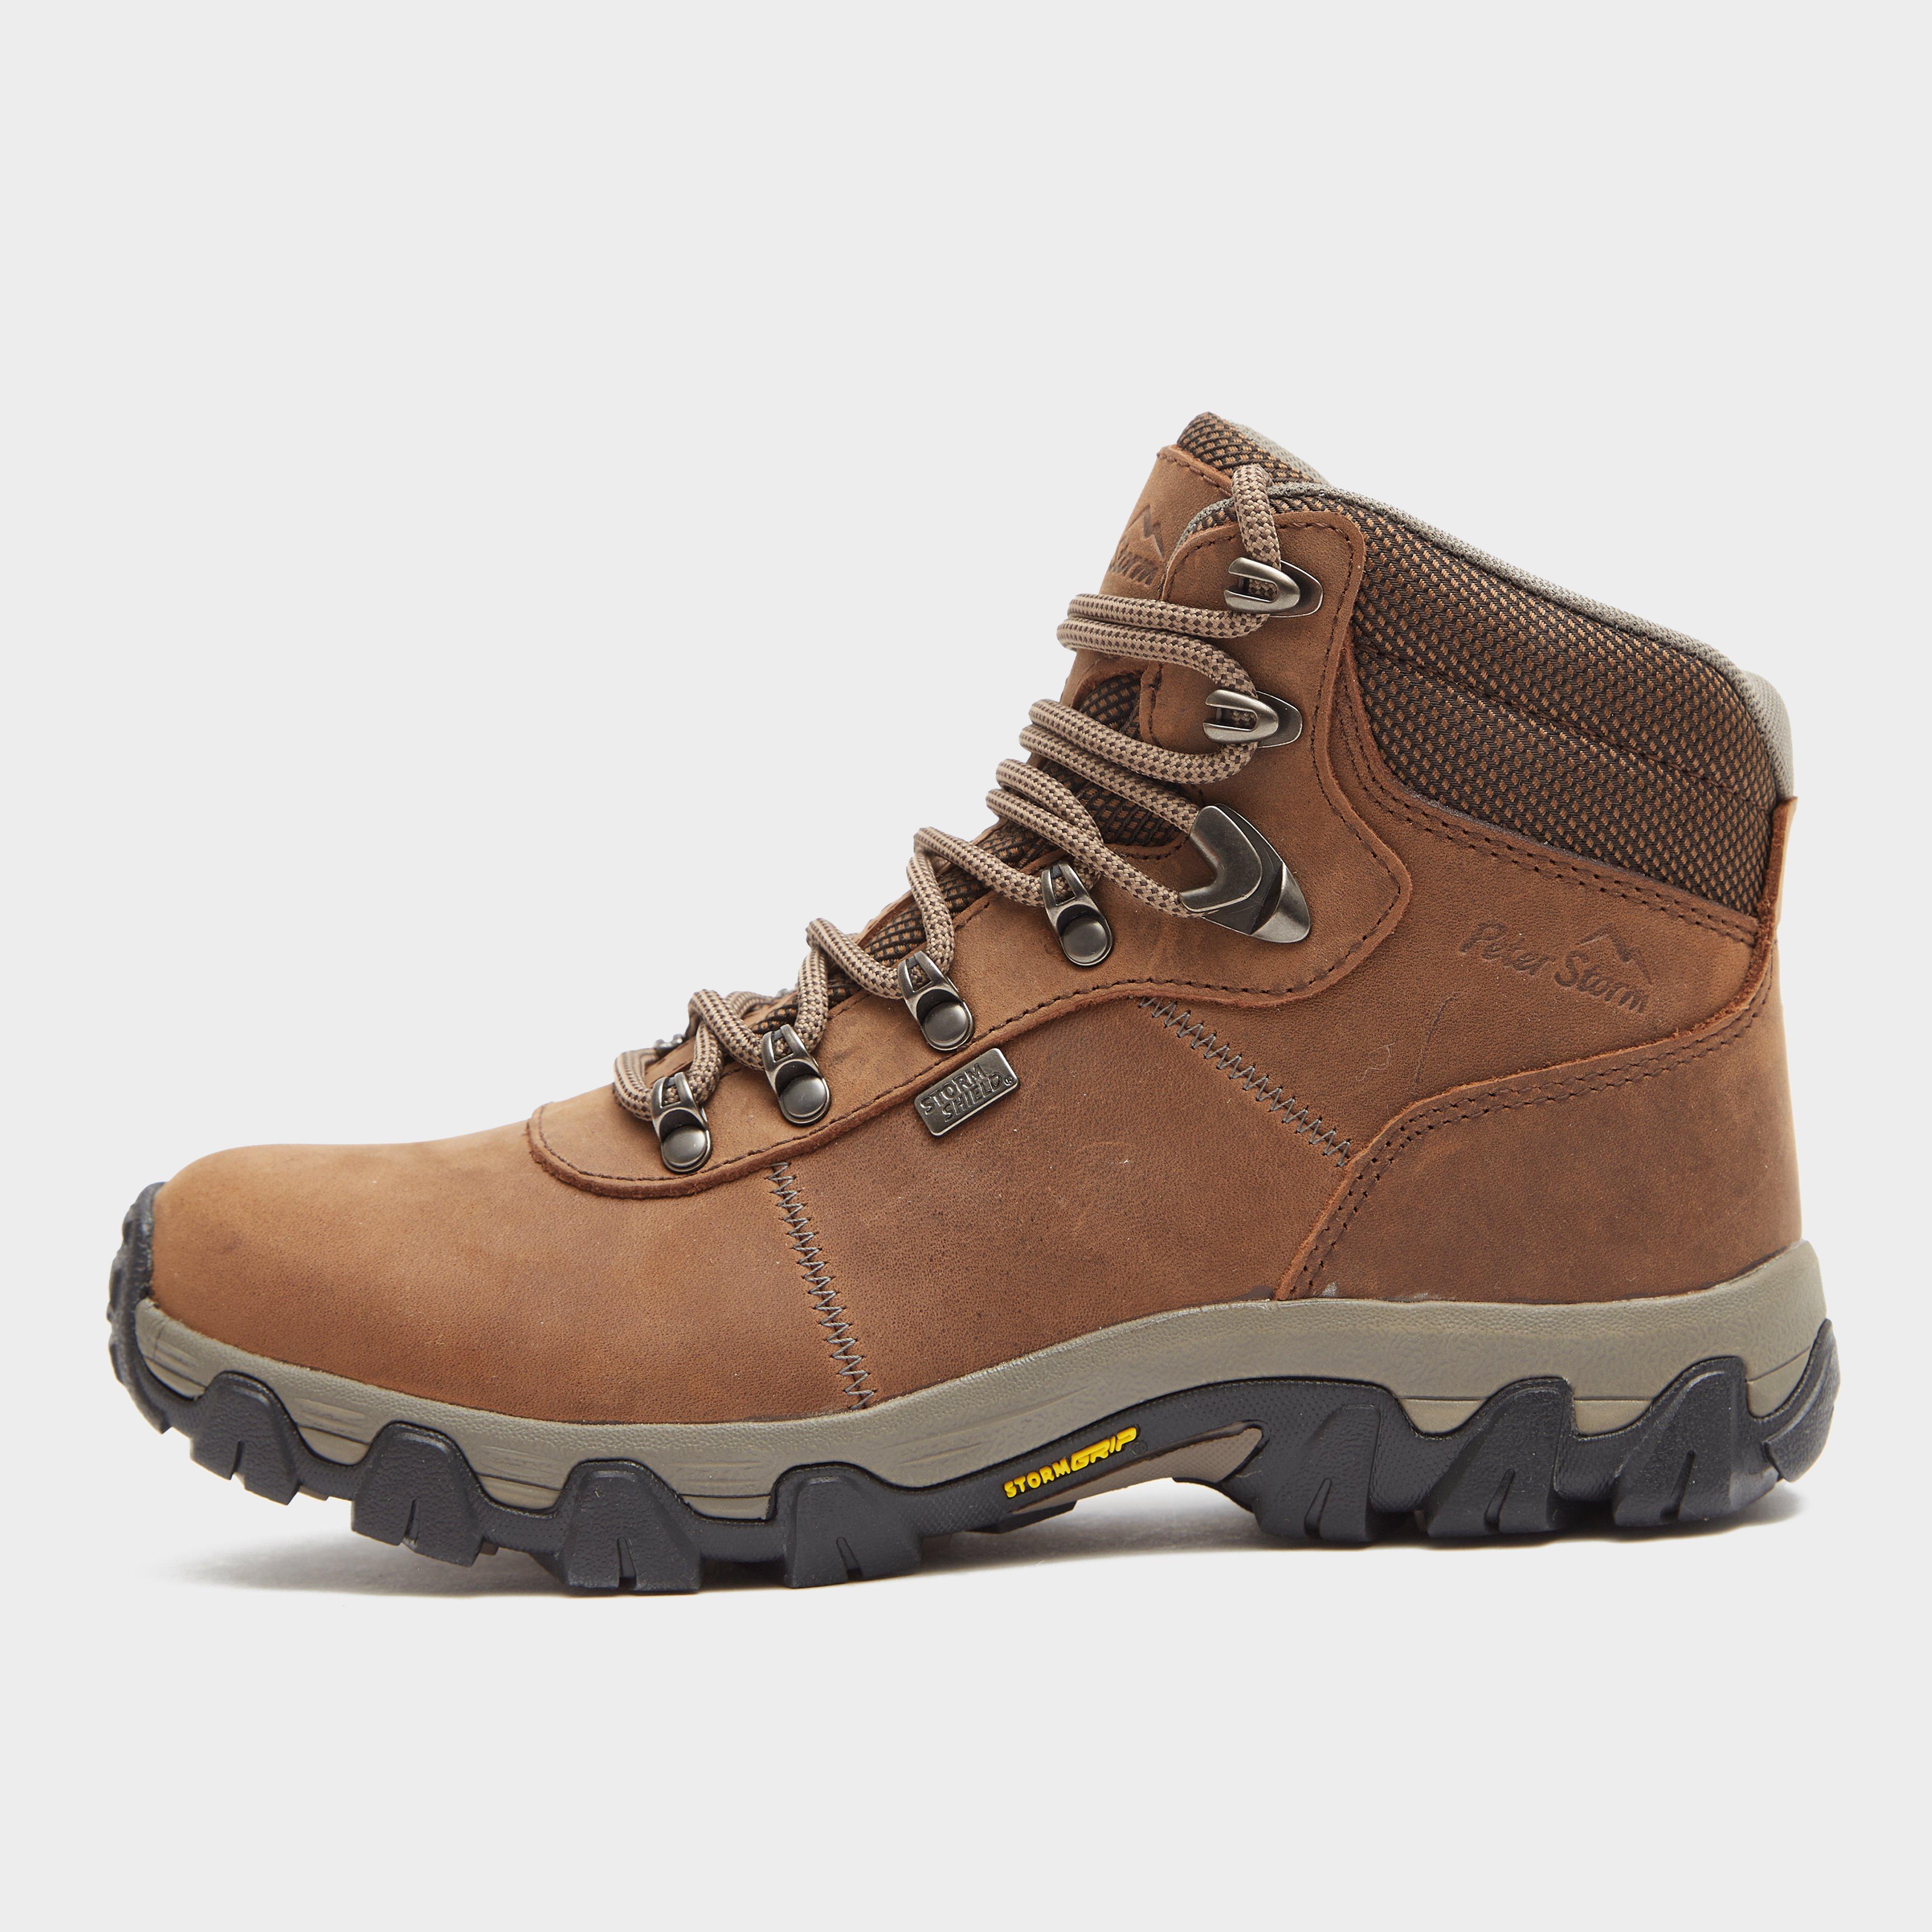 Womens Brown Leather Walking Boots | lupon.gov.ph